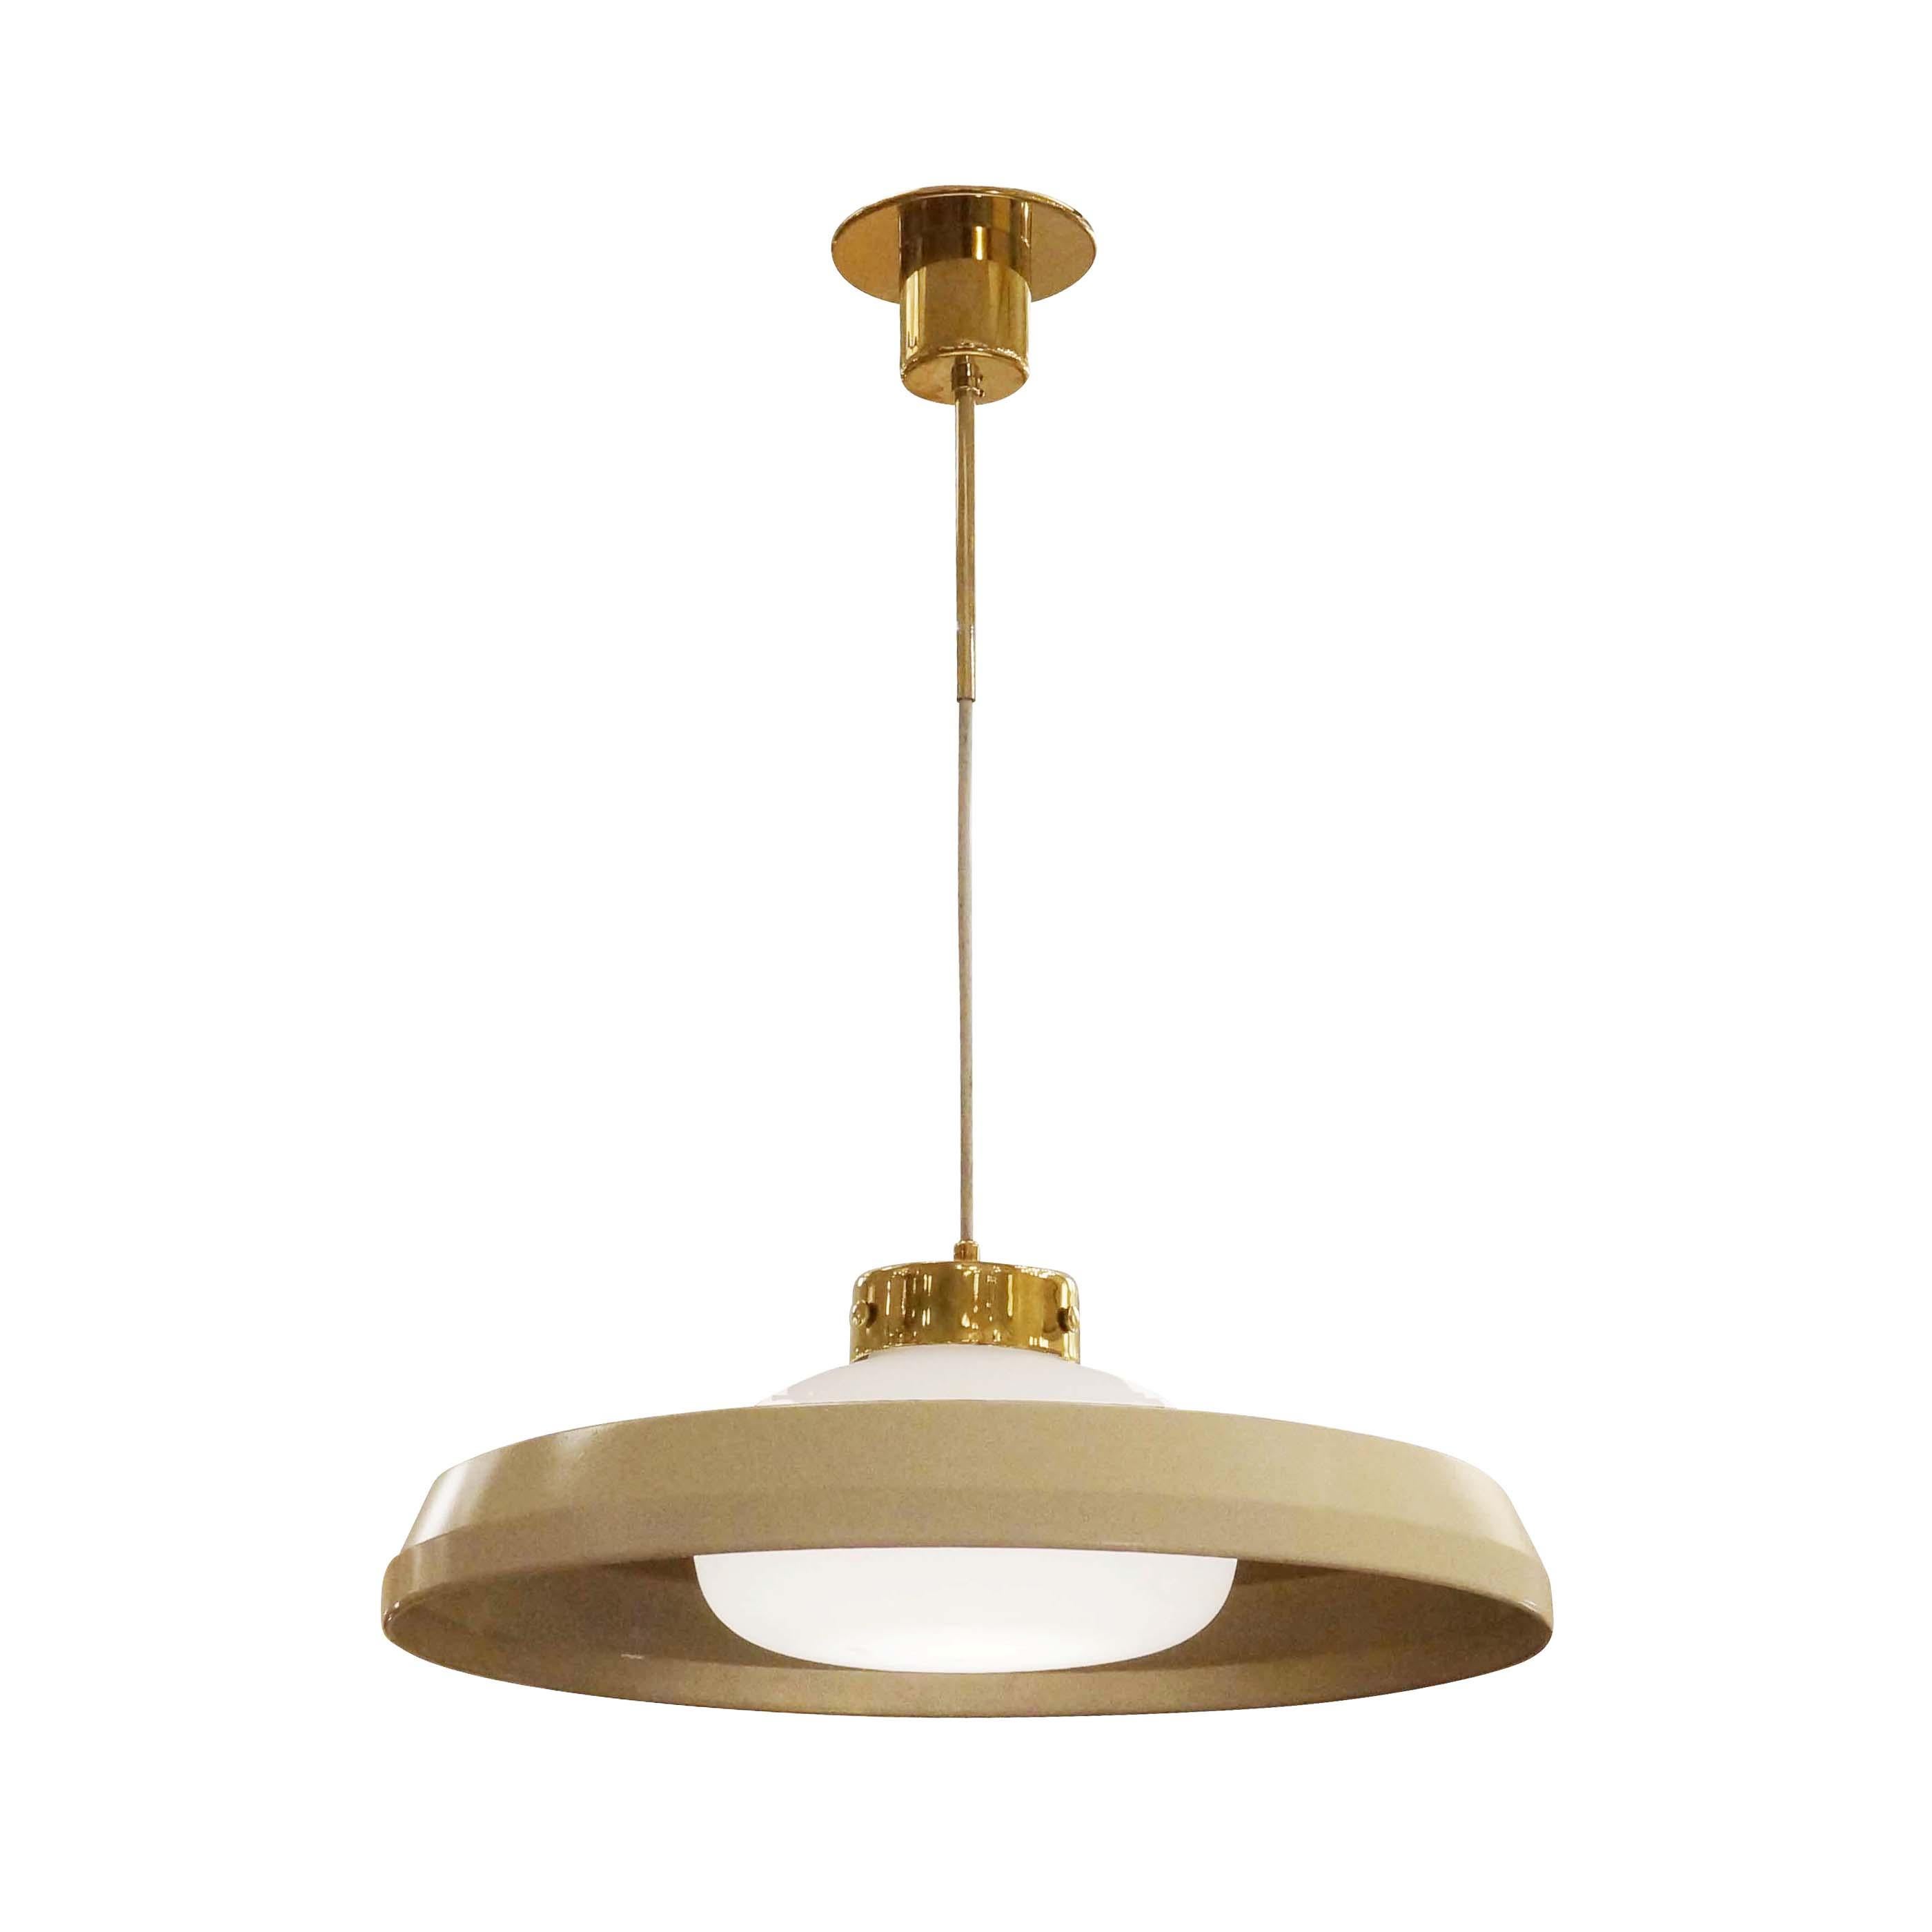 Italian Mid-Century pendant, model 2102, by Gino Sarfatti for Arteluce. Off white metal shade with frosted glass diffuser and brass hardware. Holds one light source.  

Condition: Excellent vintage condition, minor wear consistent with age and